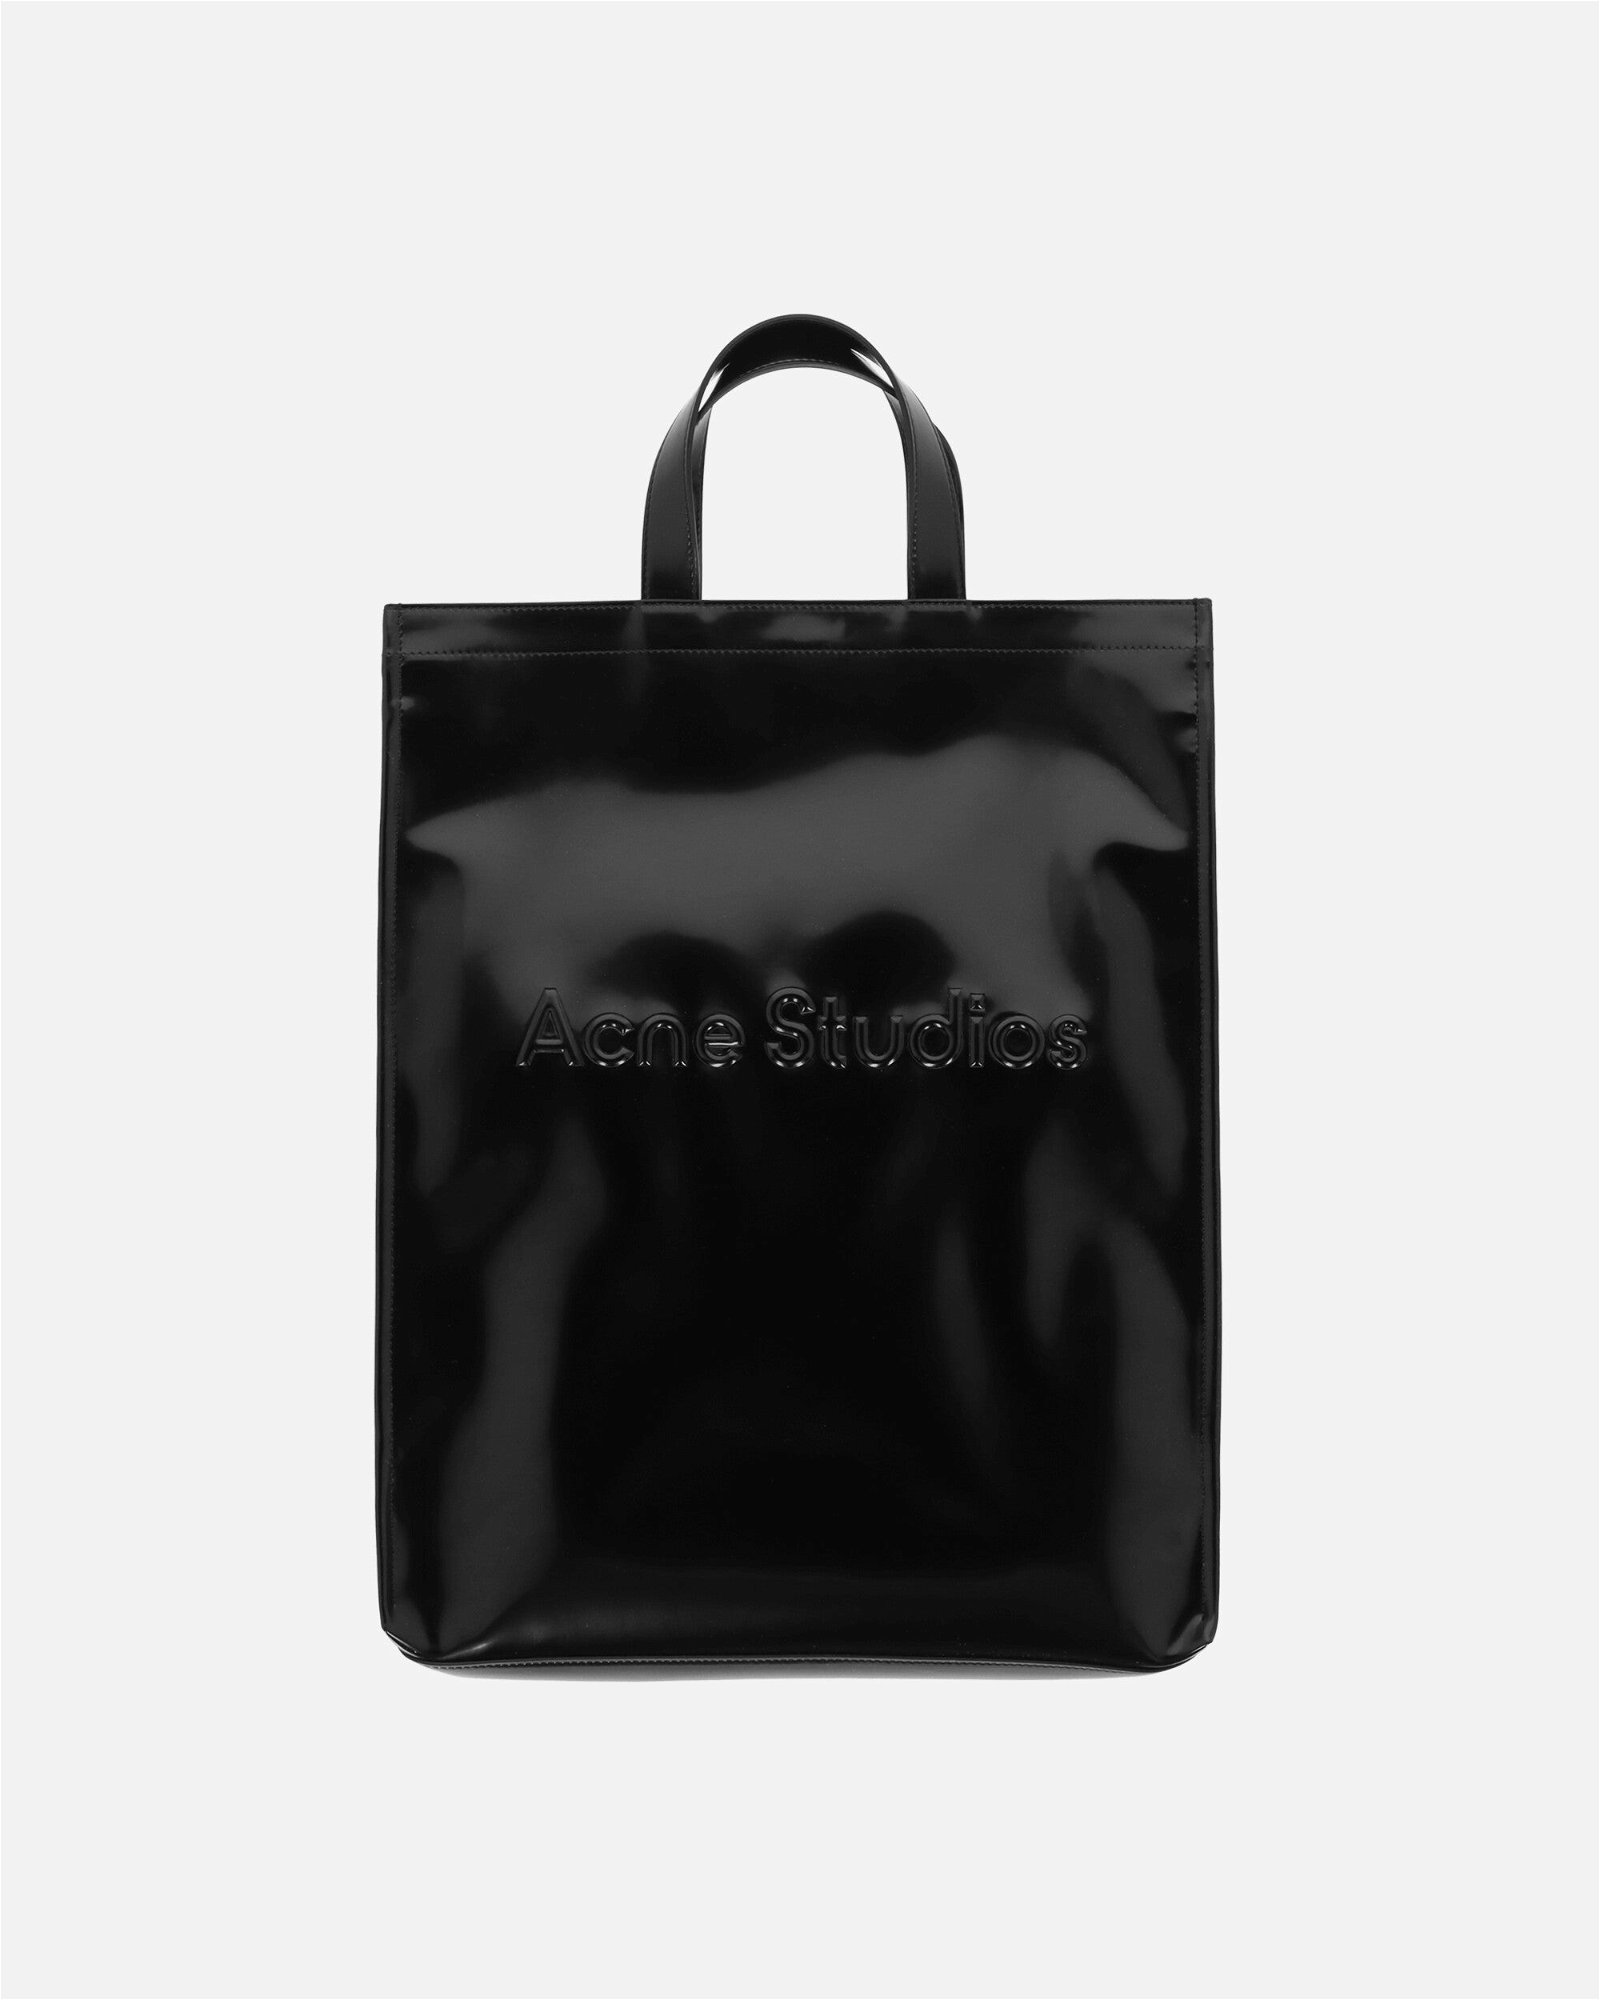 Acne Studios Market Bucket Bag – Cool City Guides powered by Avenue822